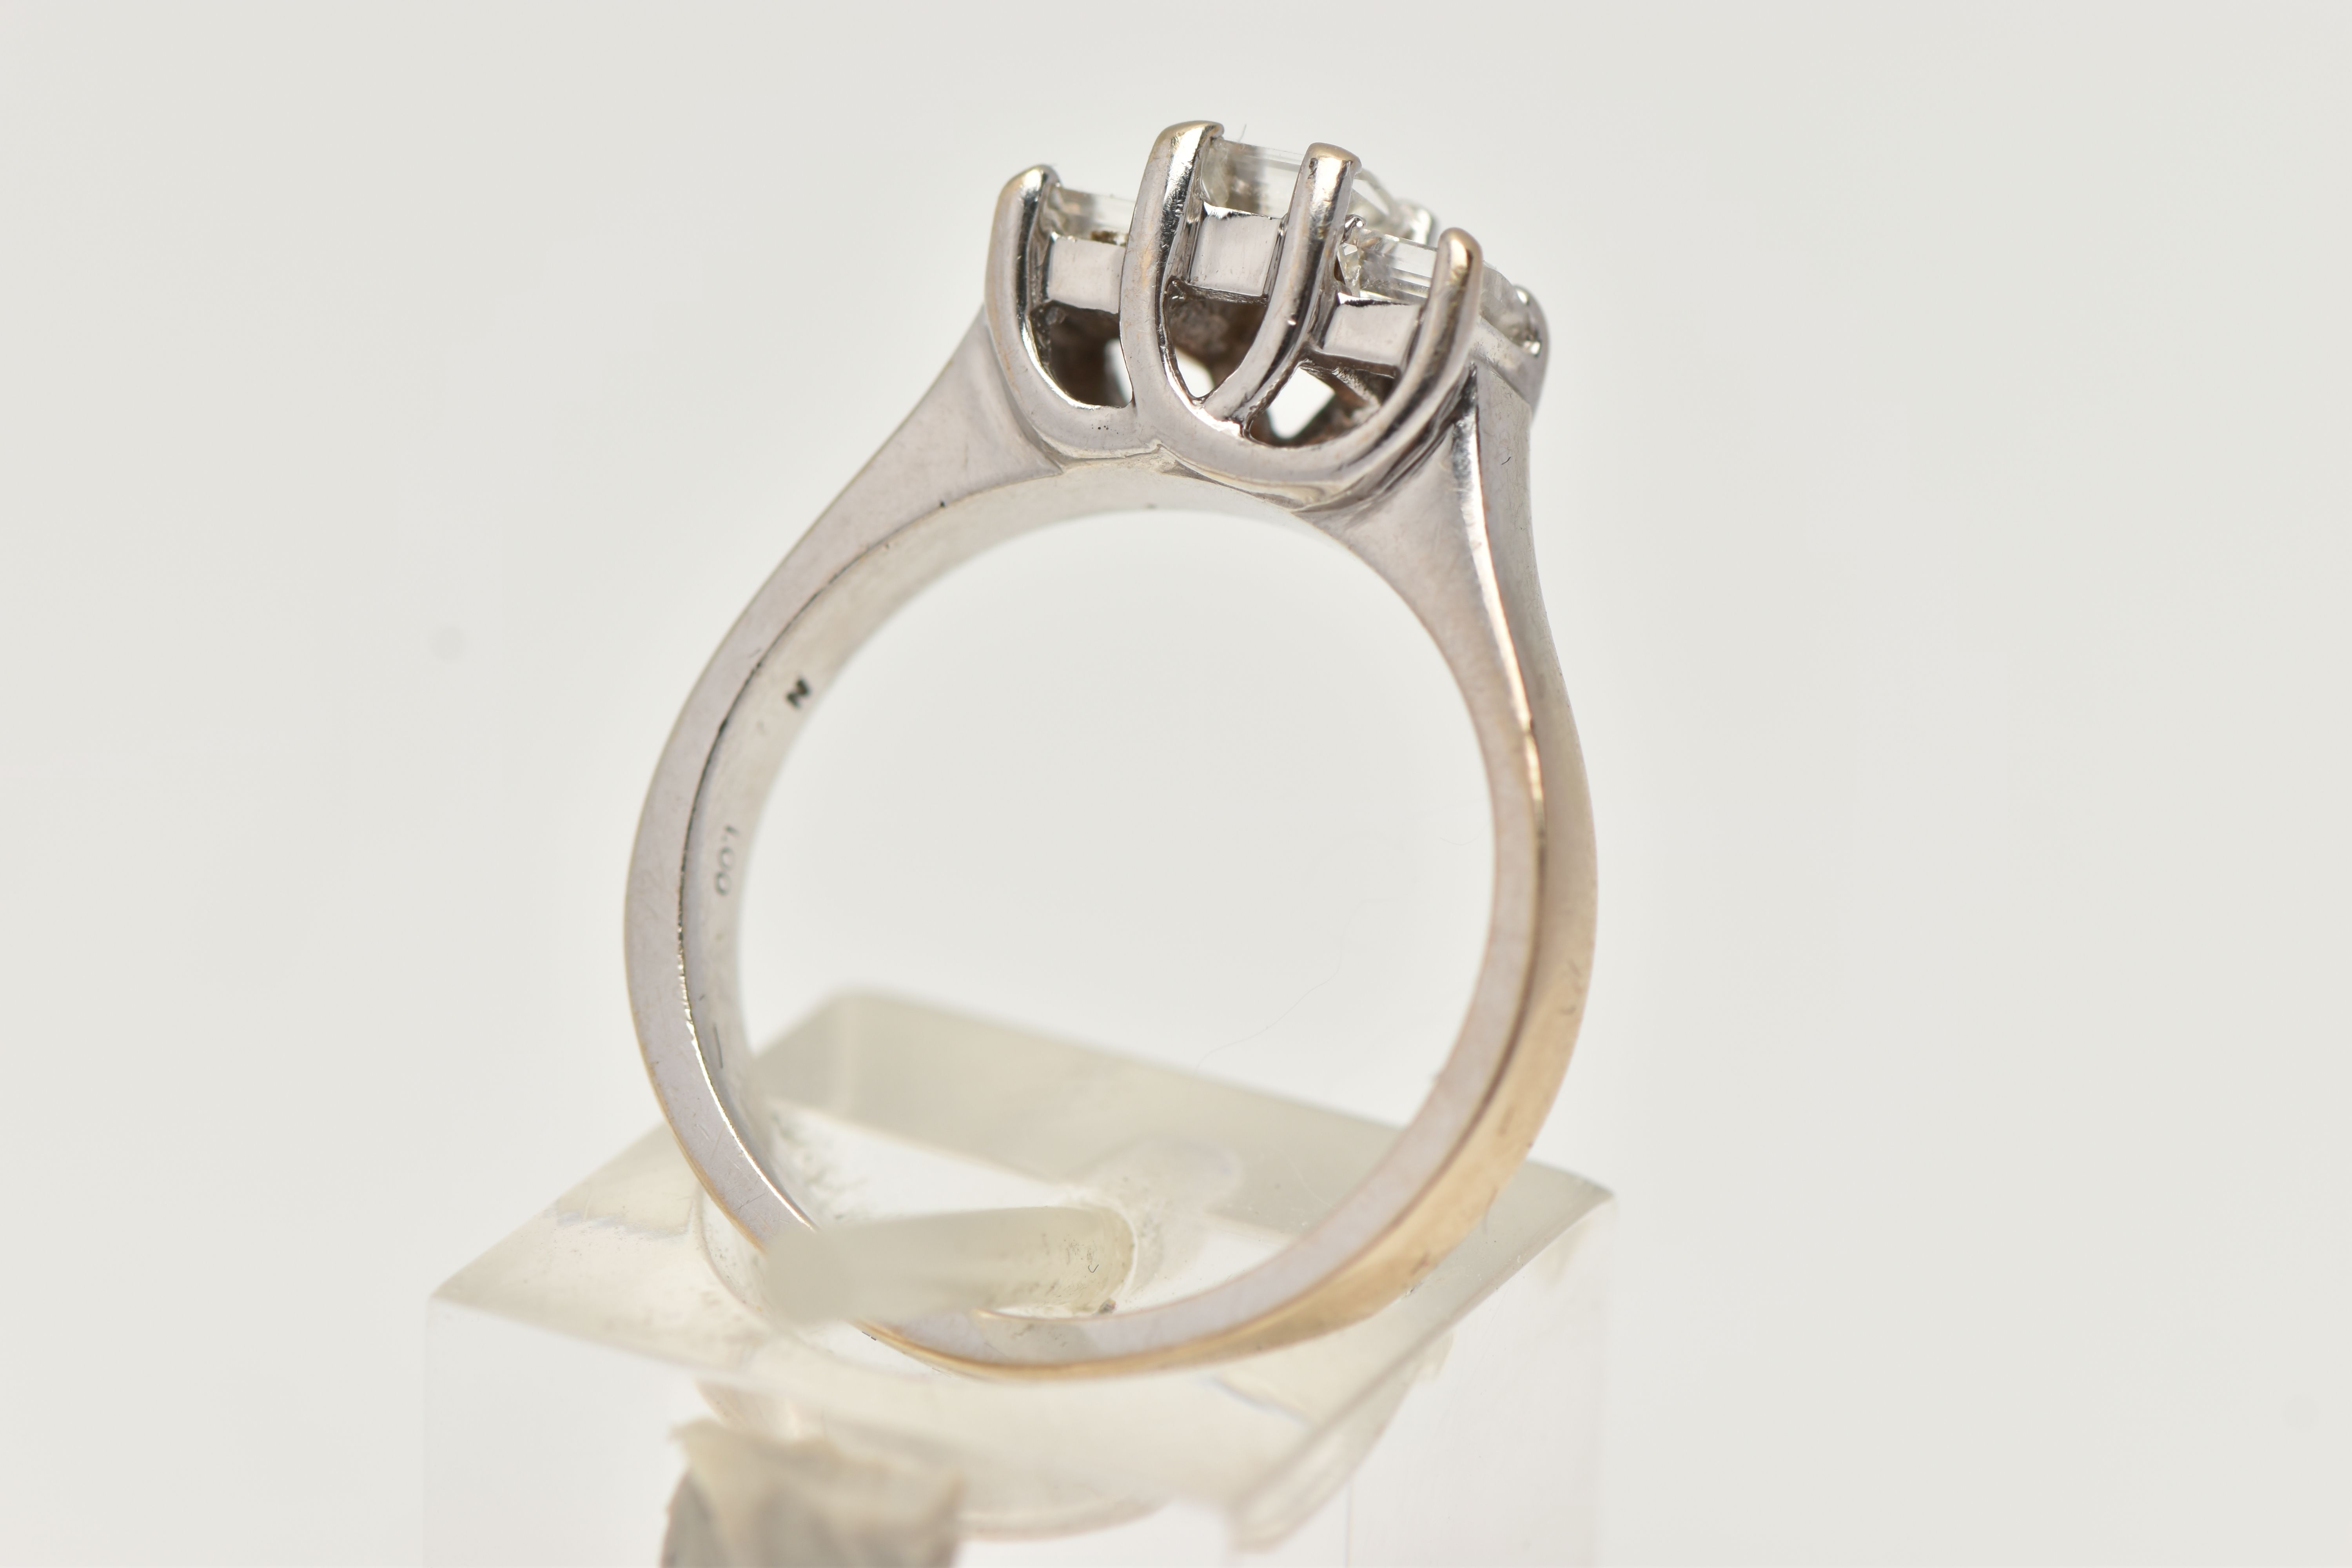 AN 18CT GOLD THREE STONE DIAMOND RING, the tiered design claw set with three millennium cut - Image 3 of 4